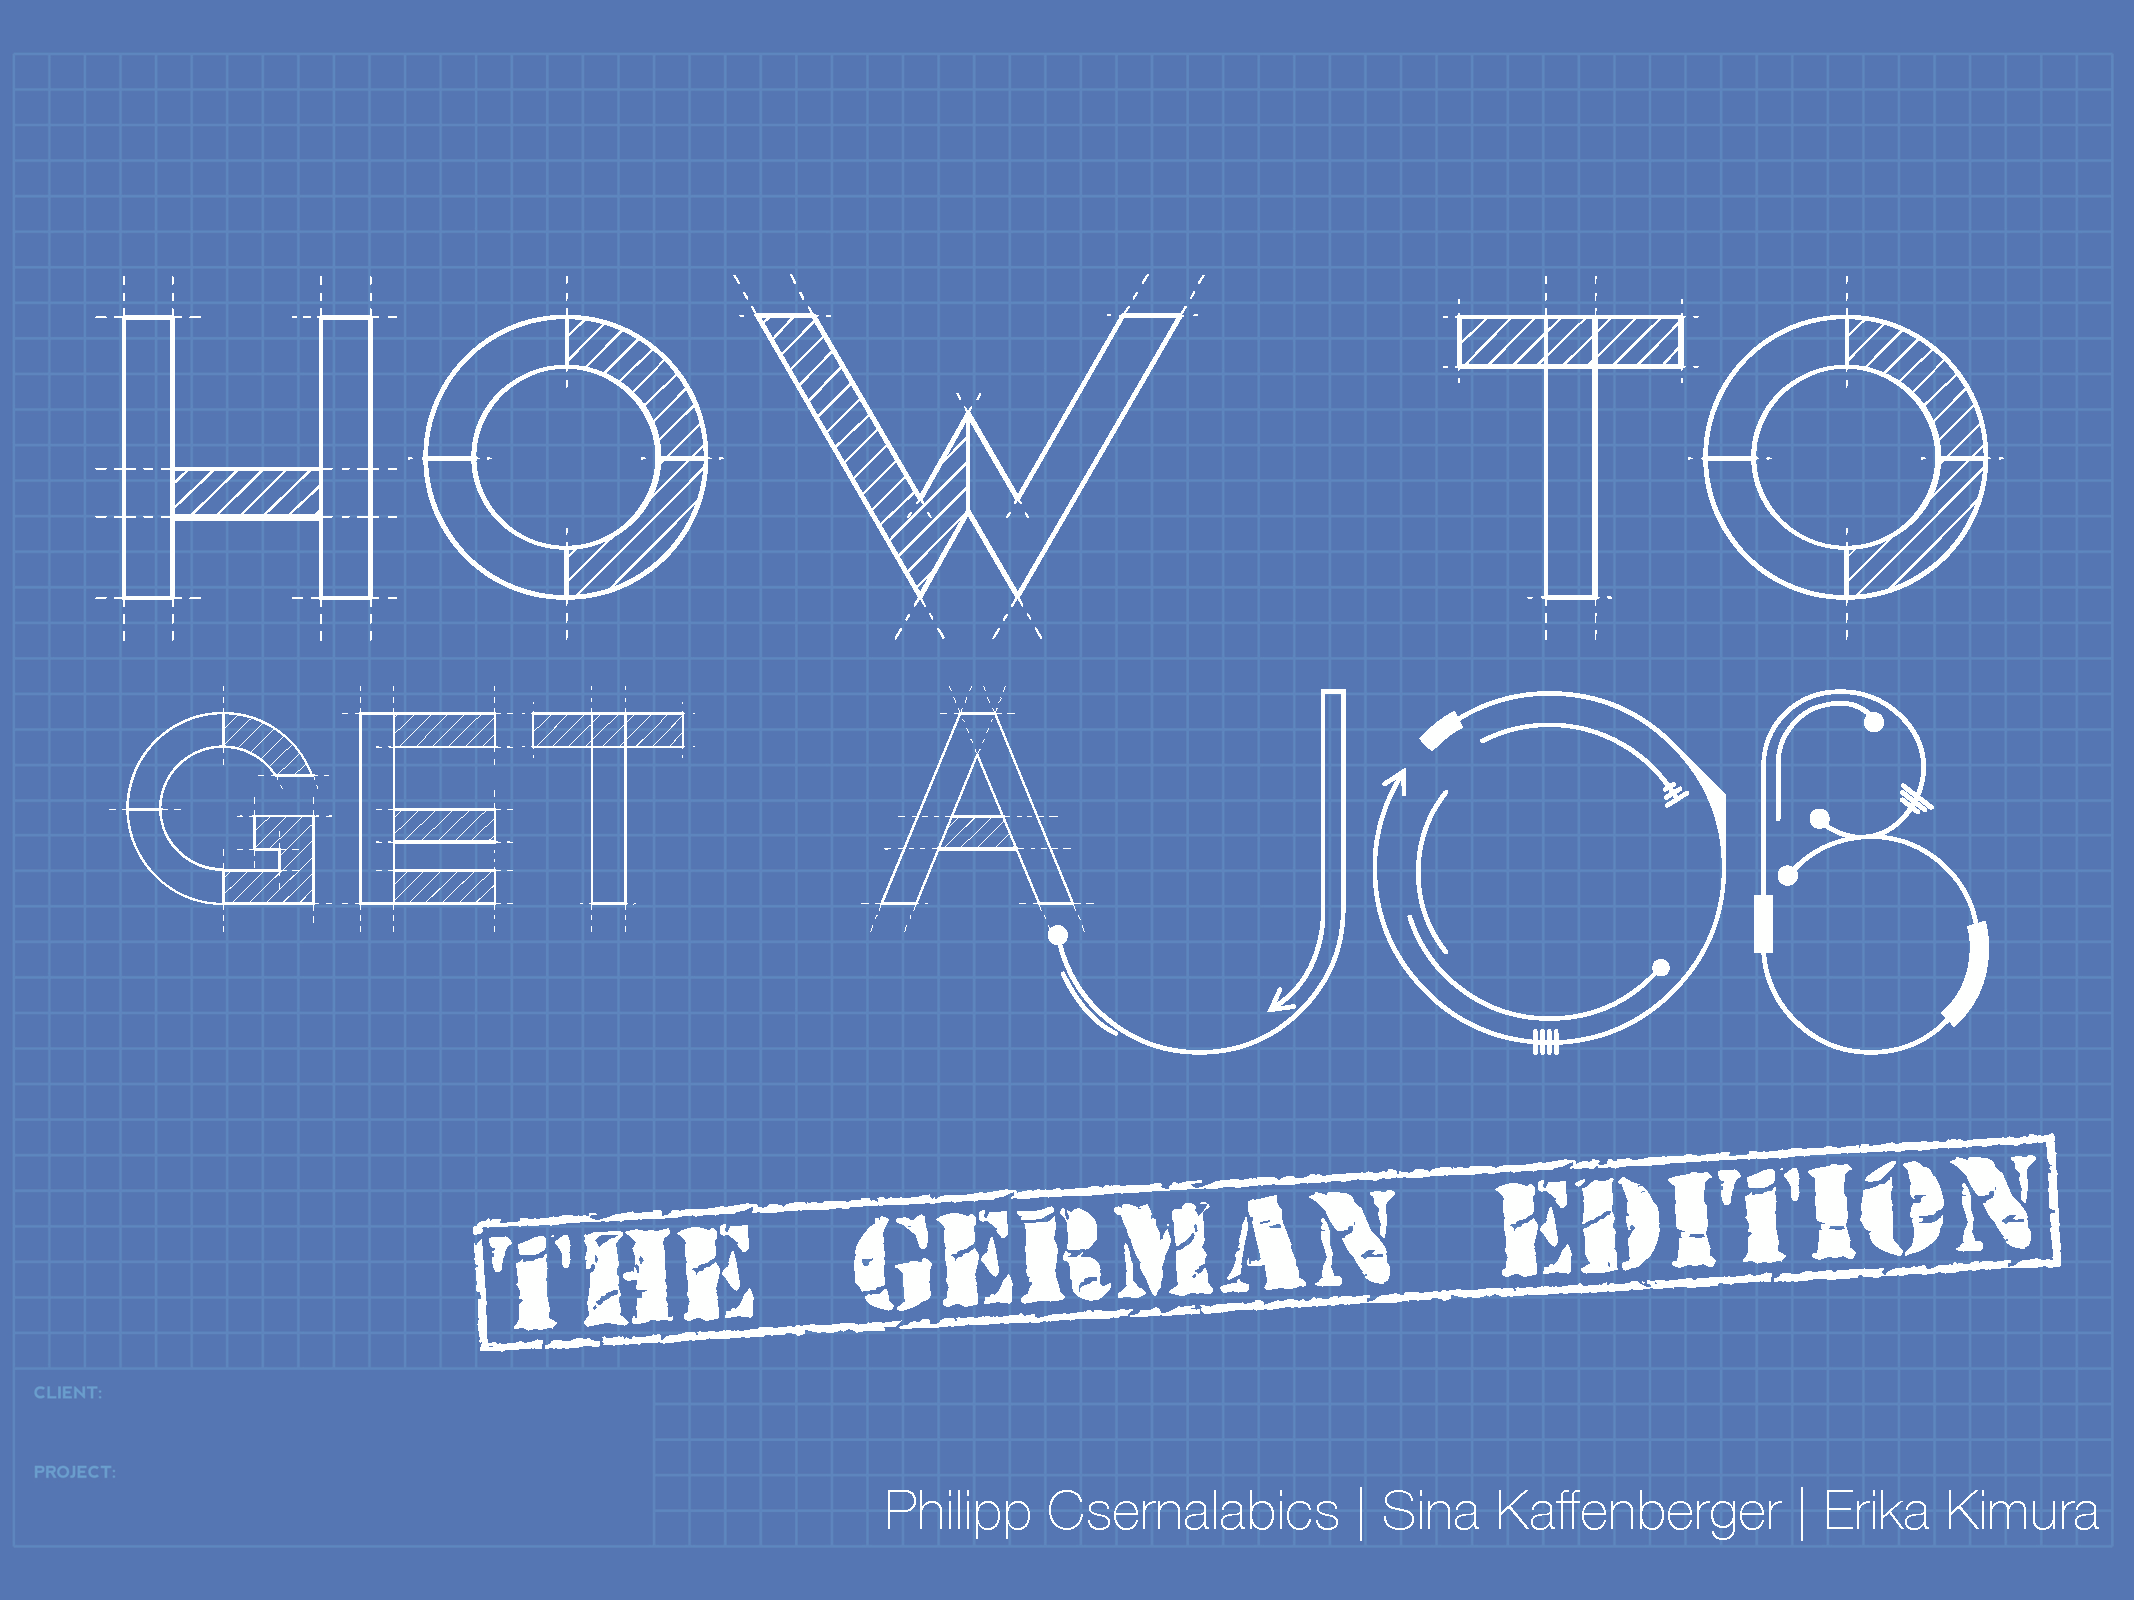 How to Get a Job in Germany Presentation Slide